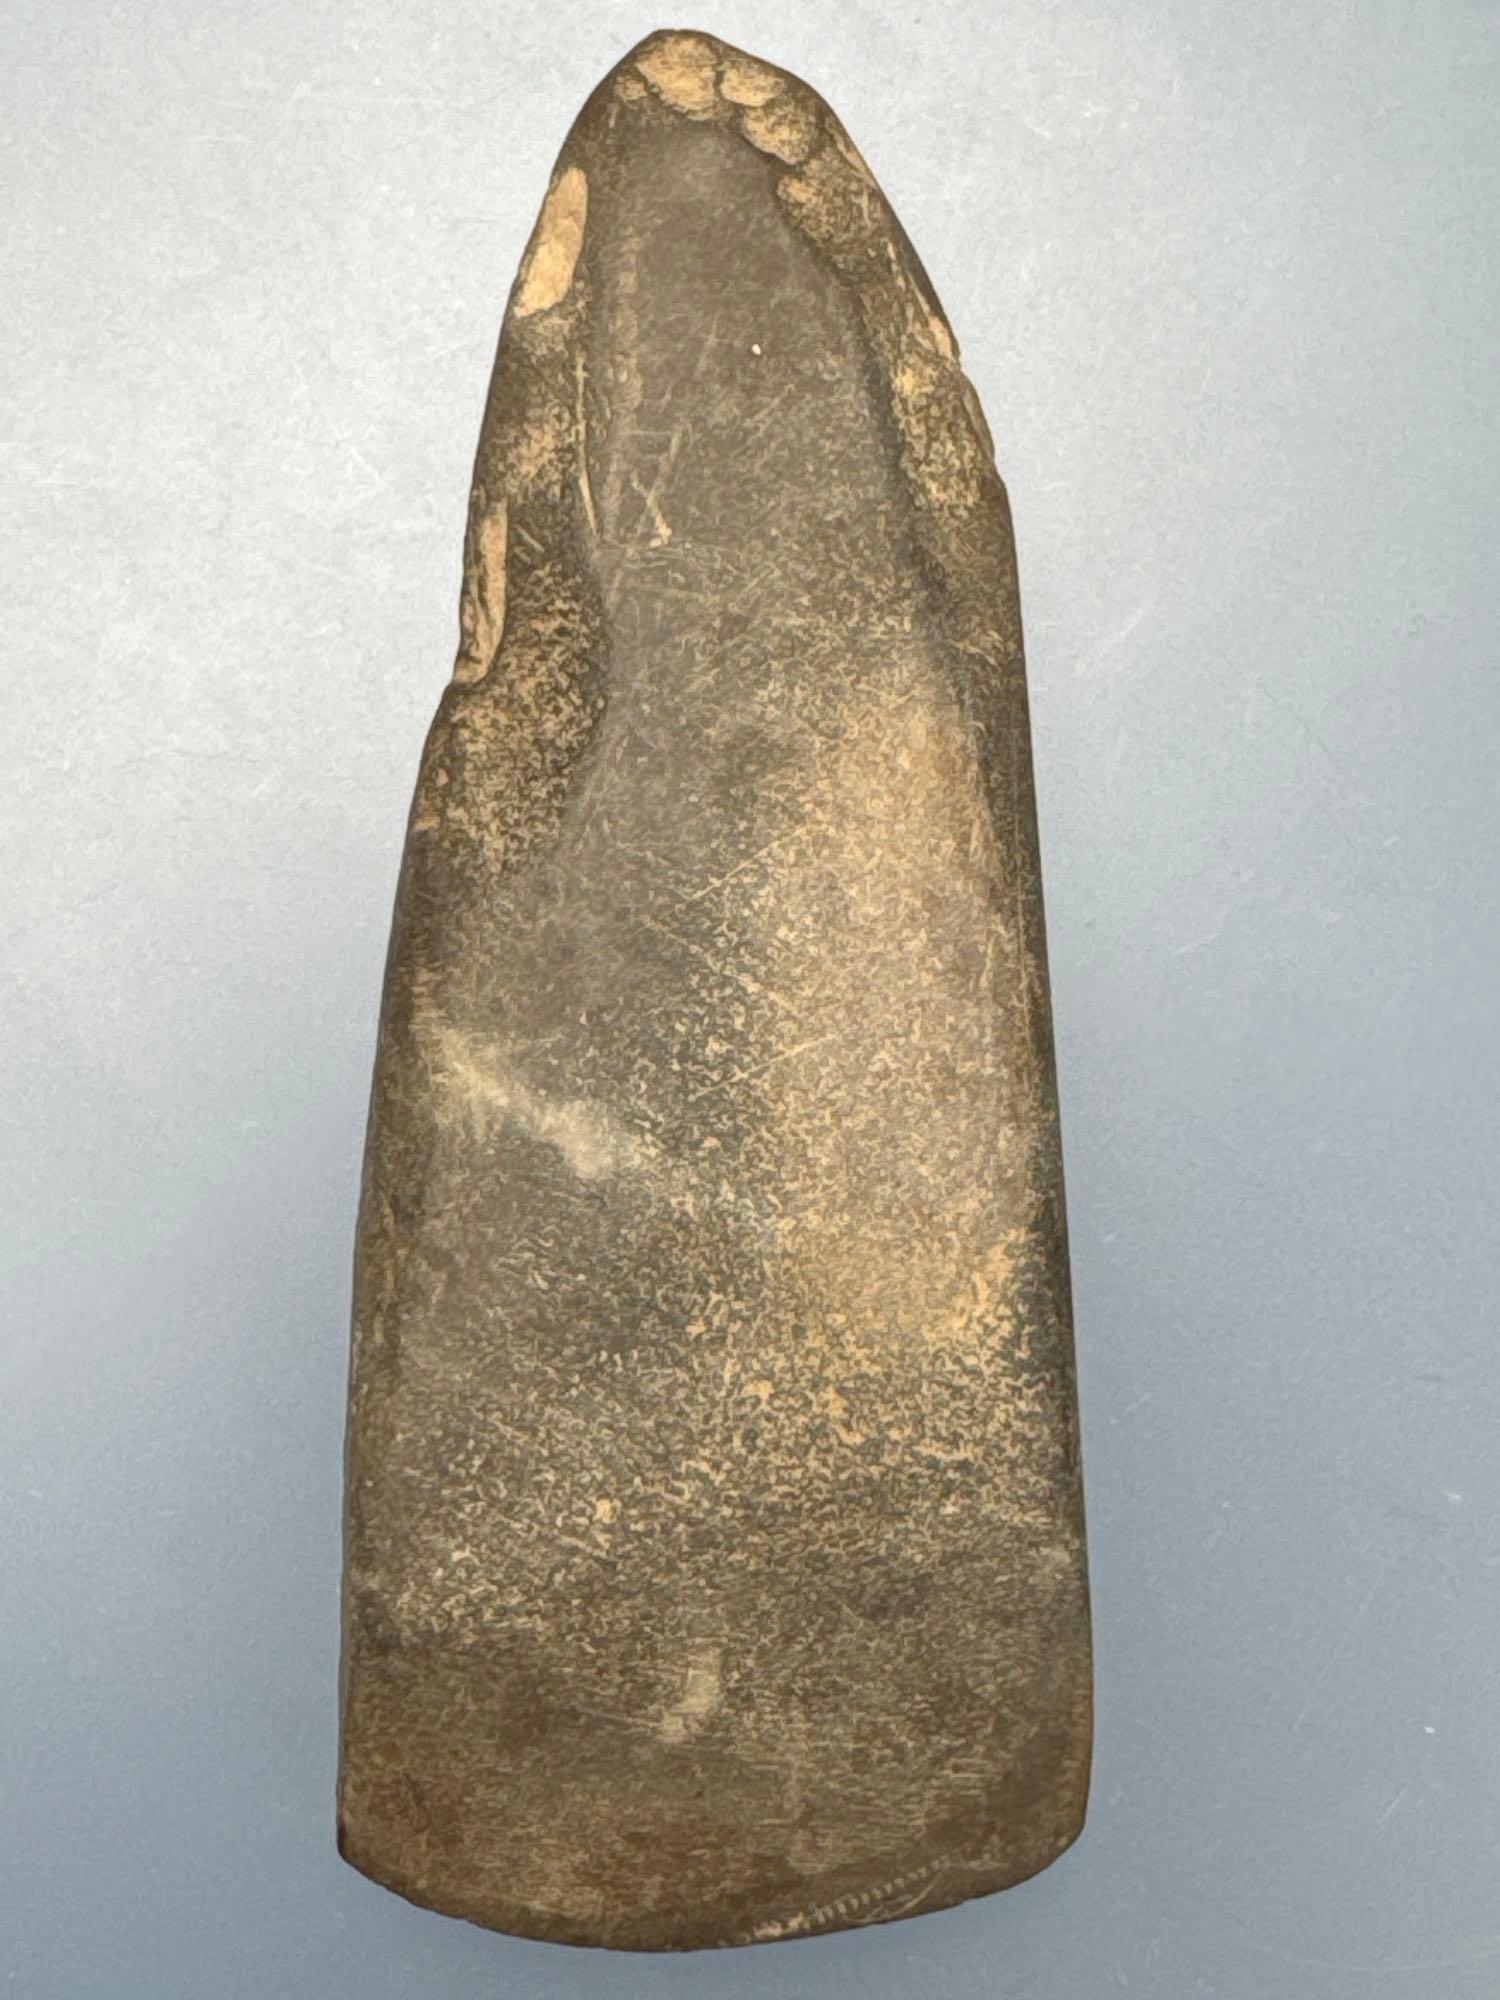 Nice 4" Celt, Found in Lycoming Co., PA, Ex: Kauffman Collection